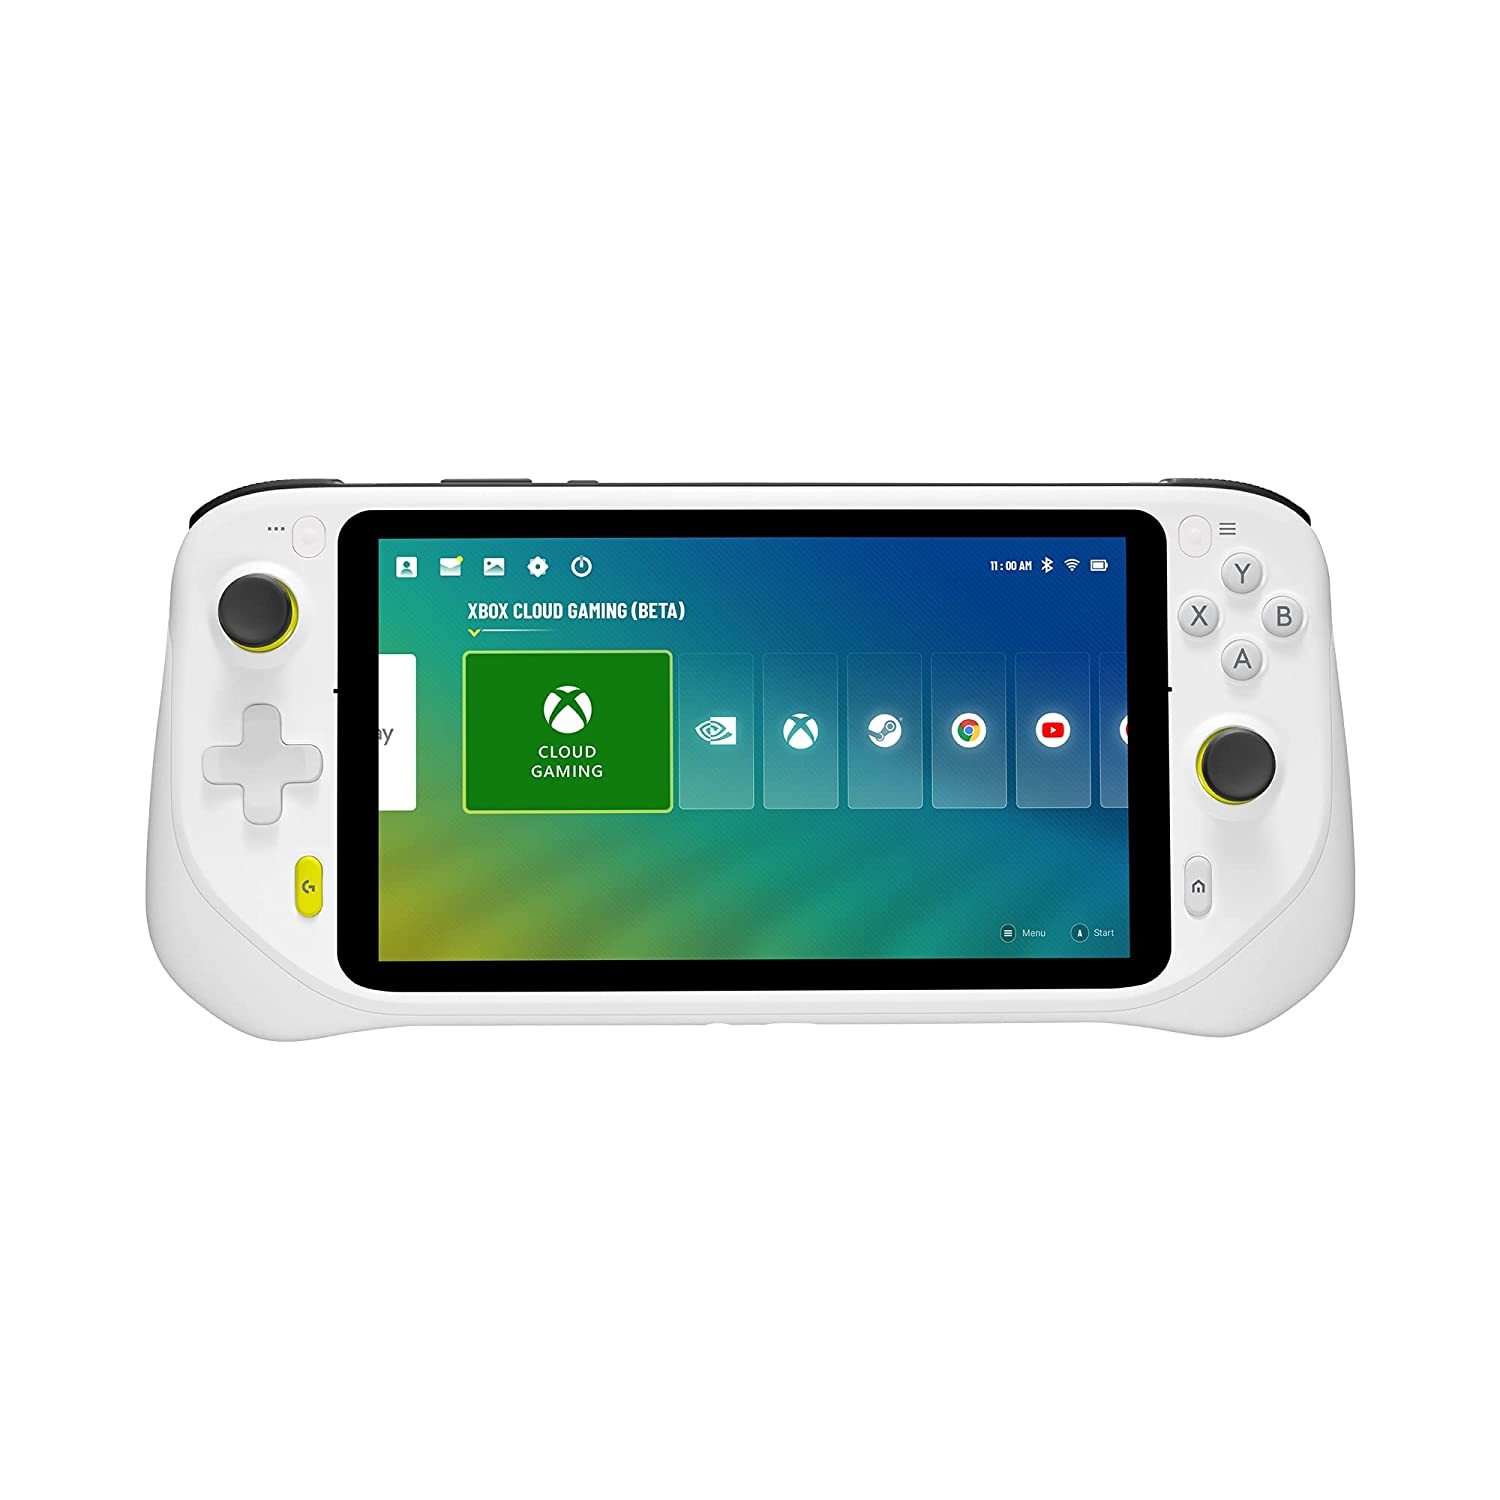 Xbox Cloud Gaming, Nvidia Geforce Now, Google Play, And 1080P 7-Inch Touchscreen - $389.96